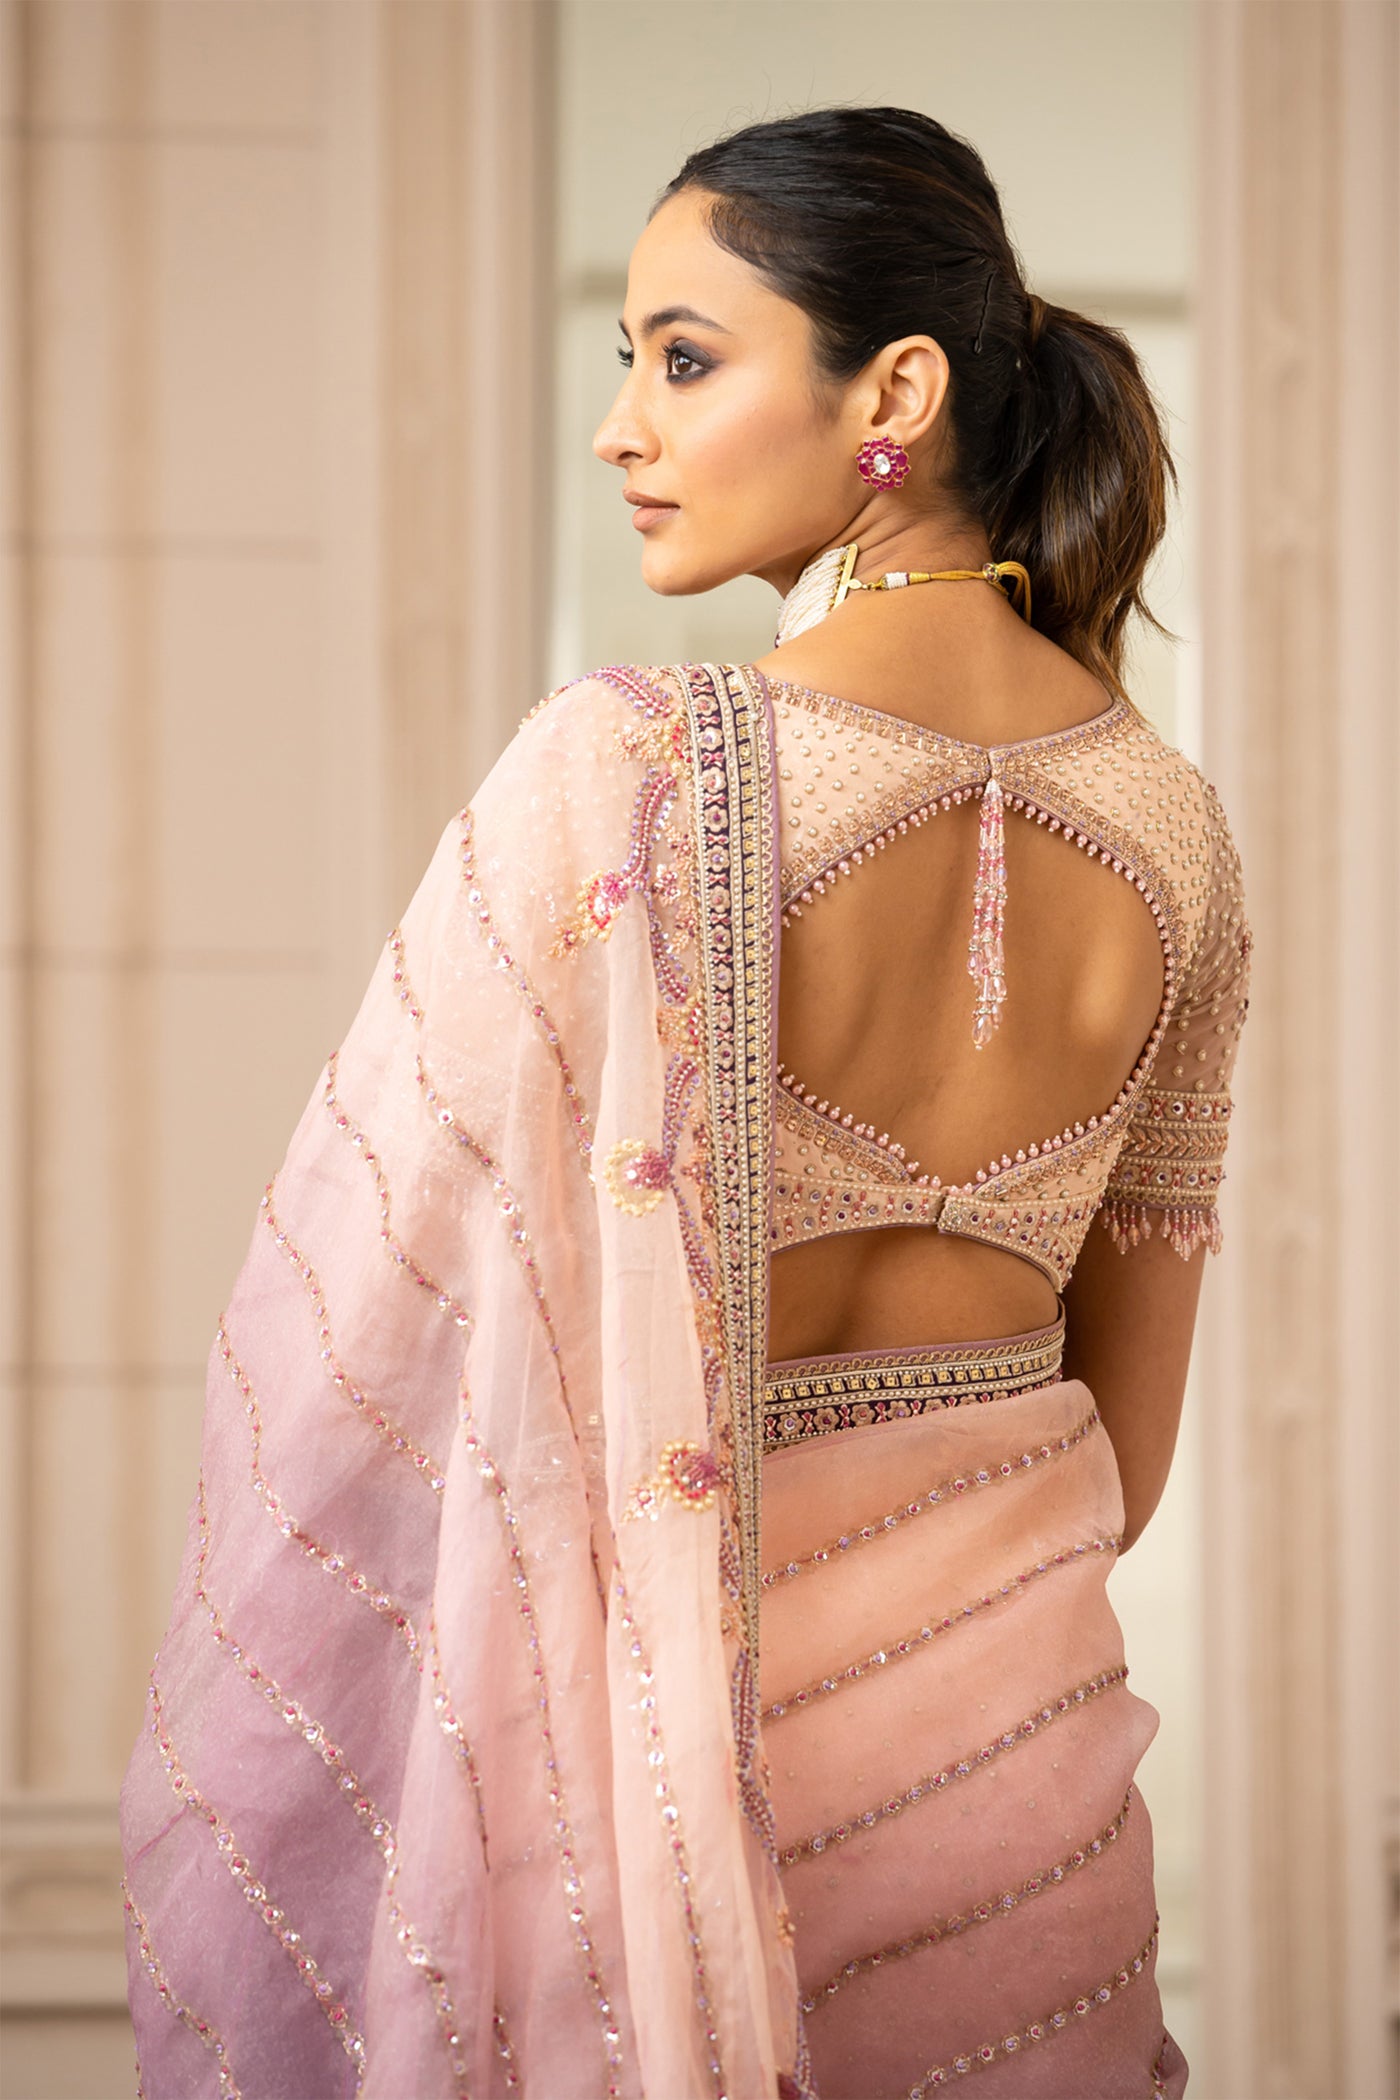 Tarun Tahiliani Ombré Two-Piece Saree With Embroidery peach purple online shopping melange singapore indian designer wear